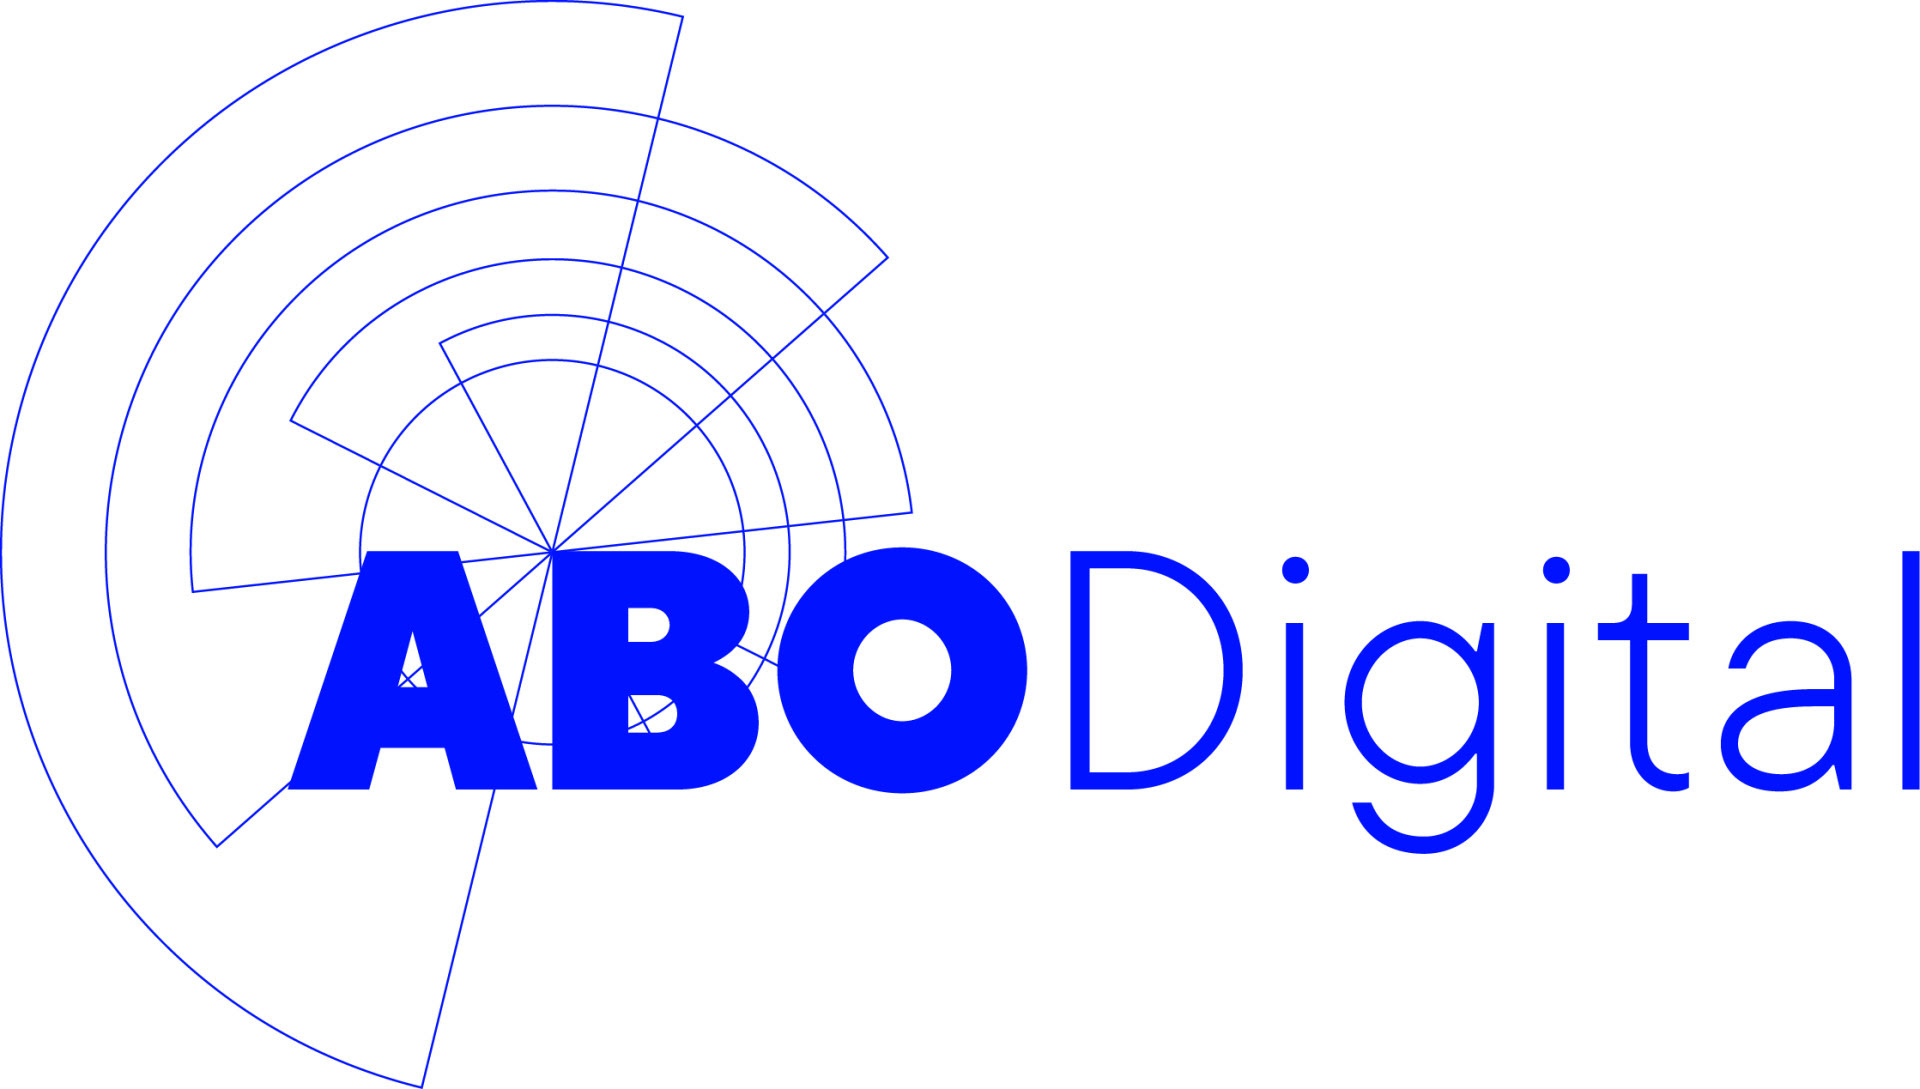 Alpha Blue Ocean (ABO) Announces Launch Of New Private Investment Firm, ABO Digital